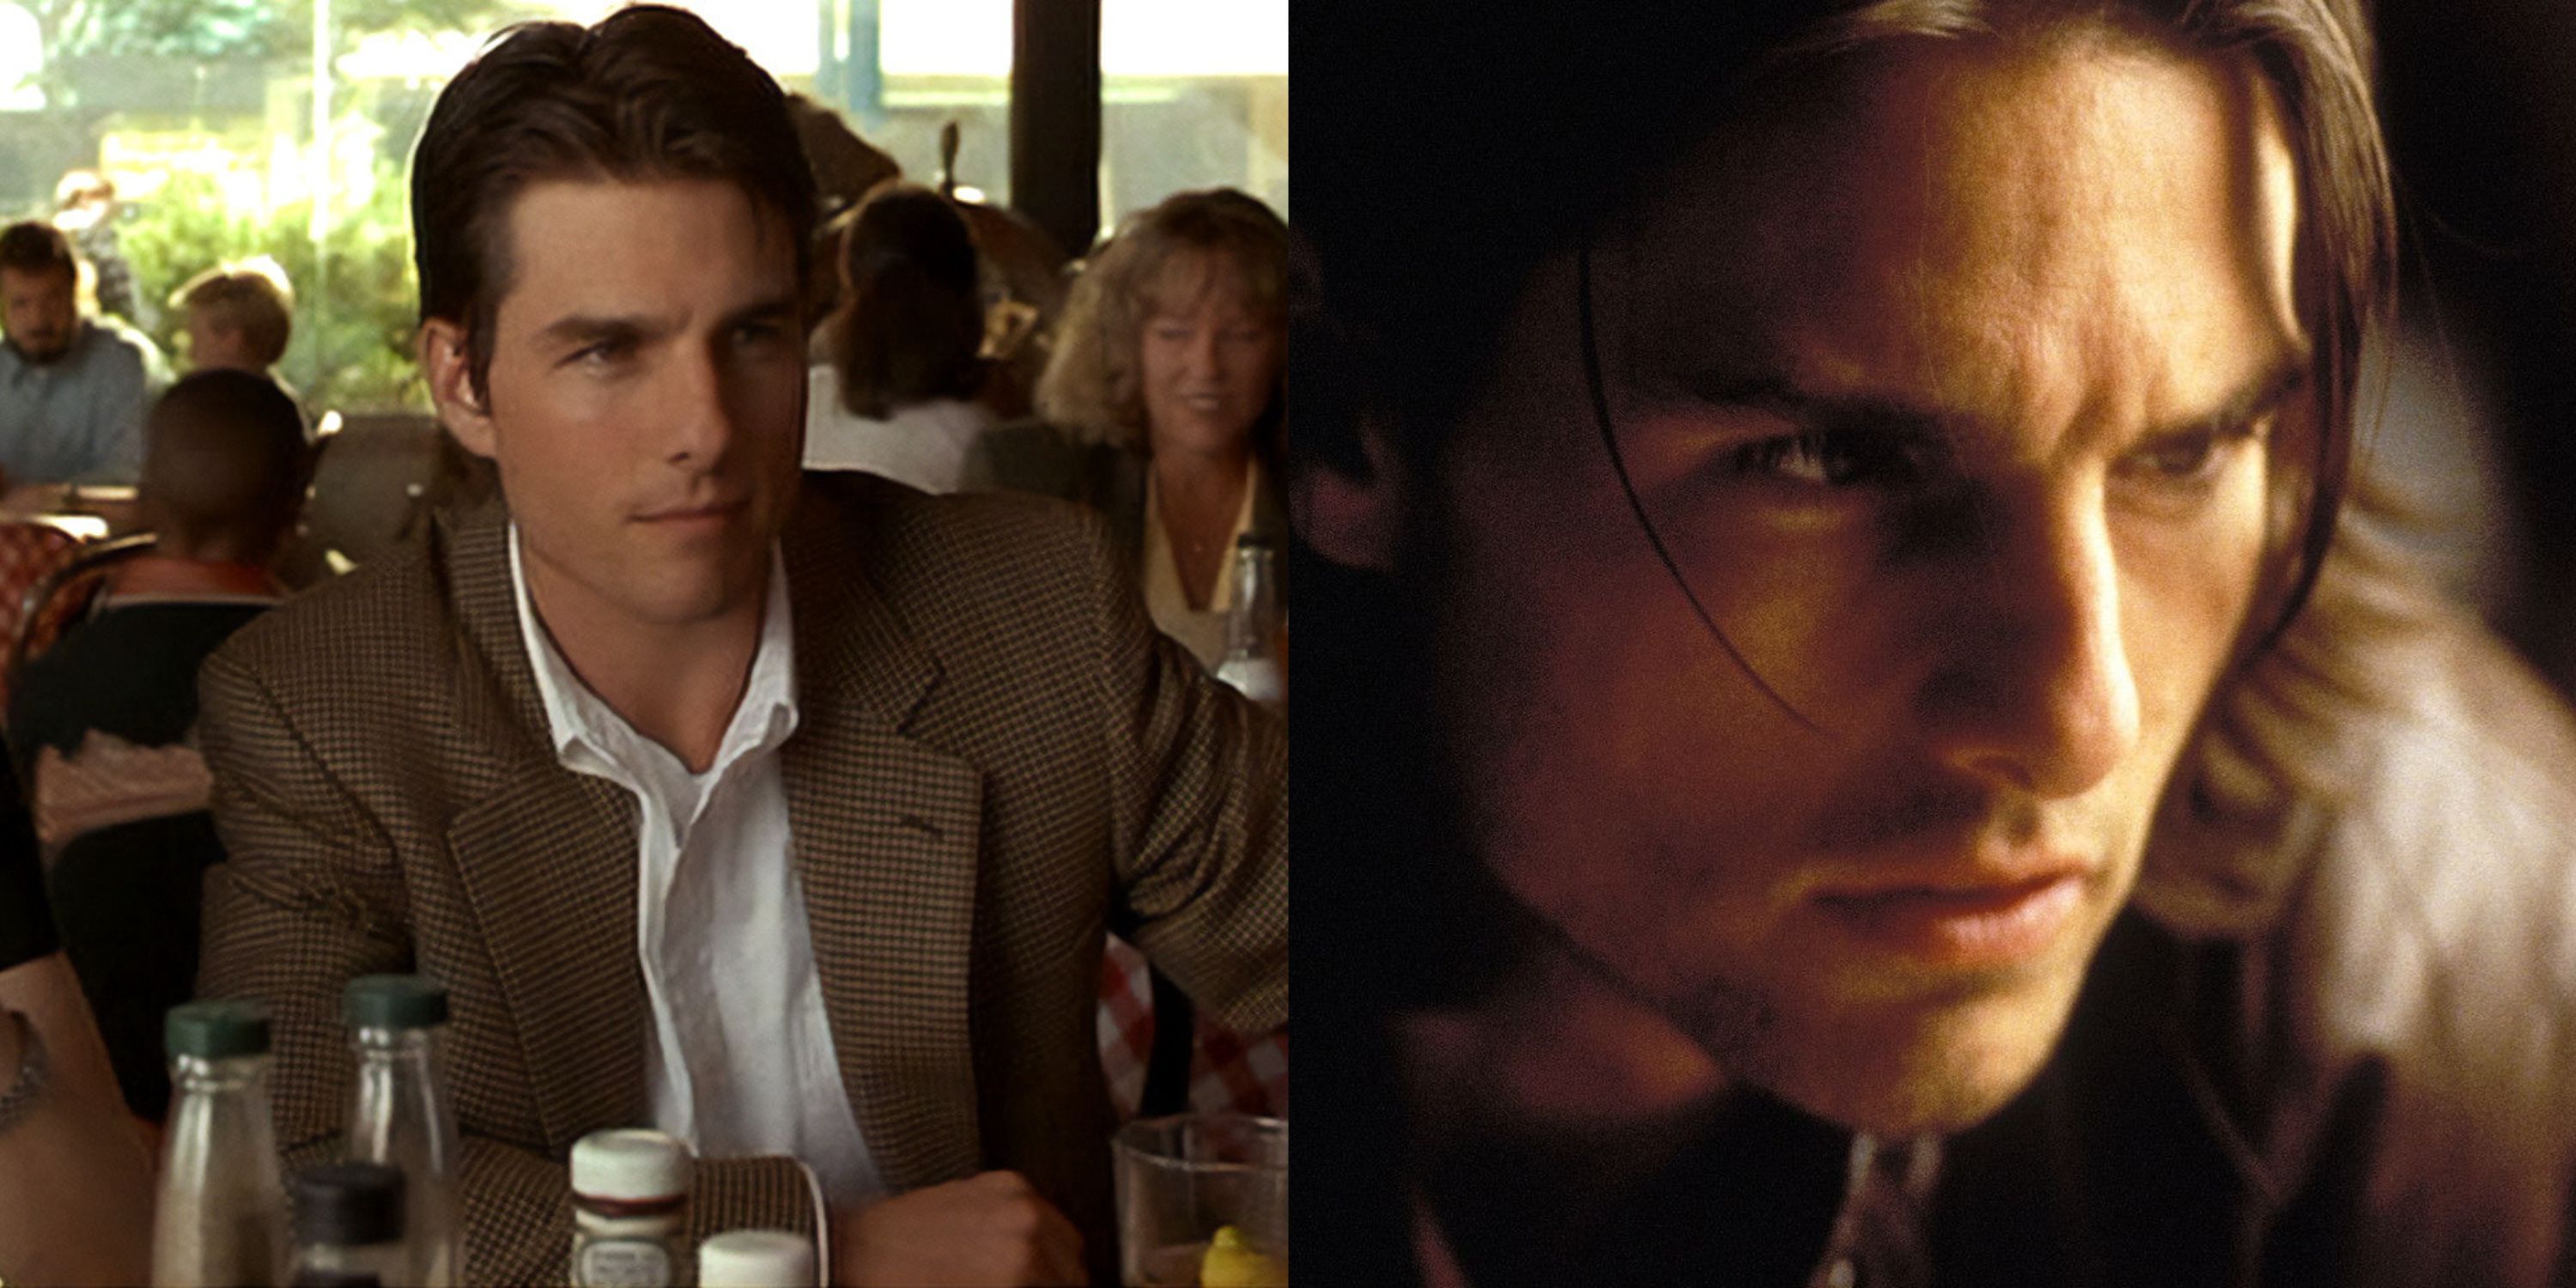 Featured image Tom Cruise in Magnolia and in Jerry Maguire